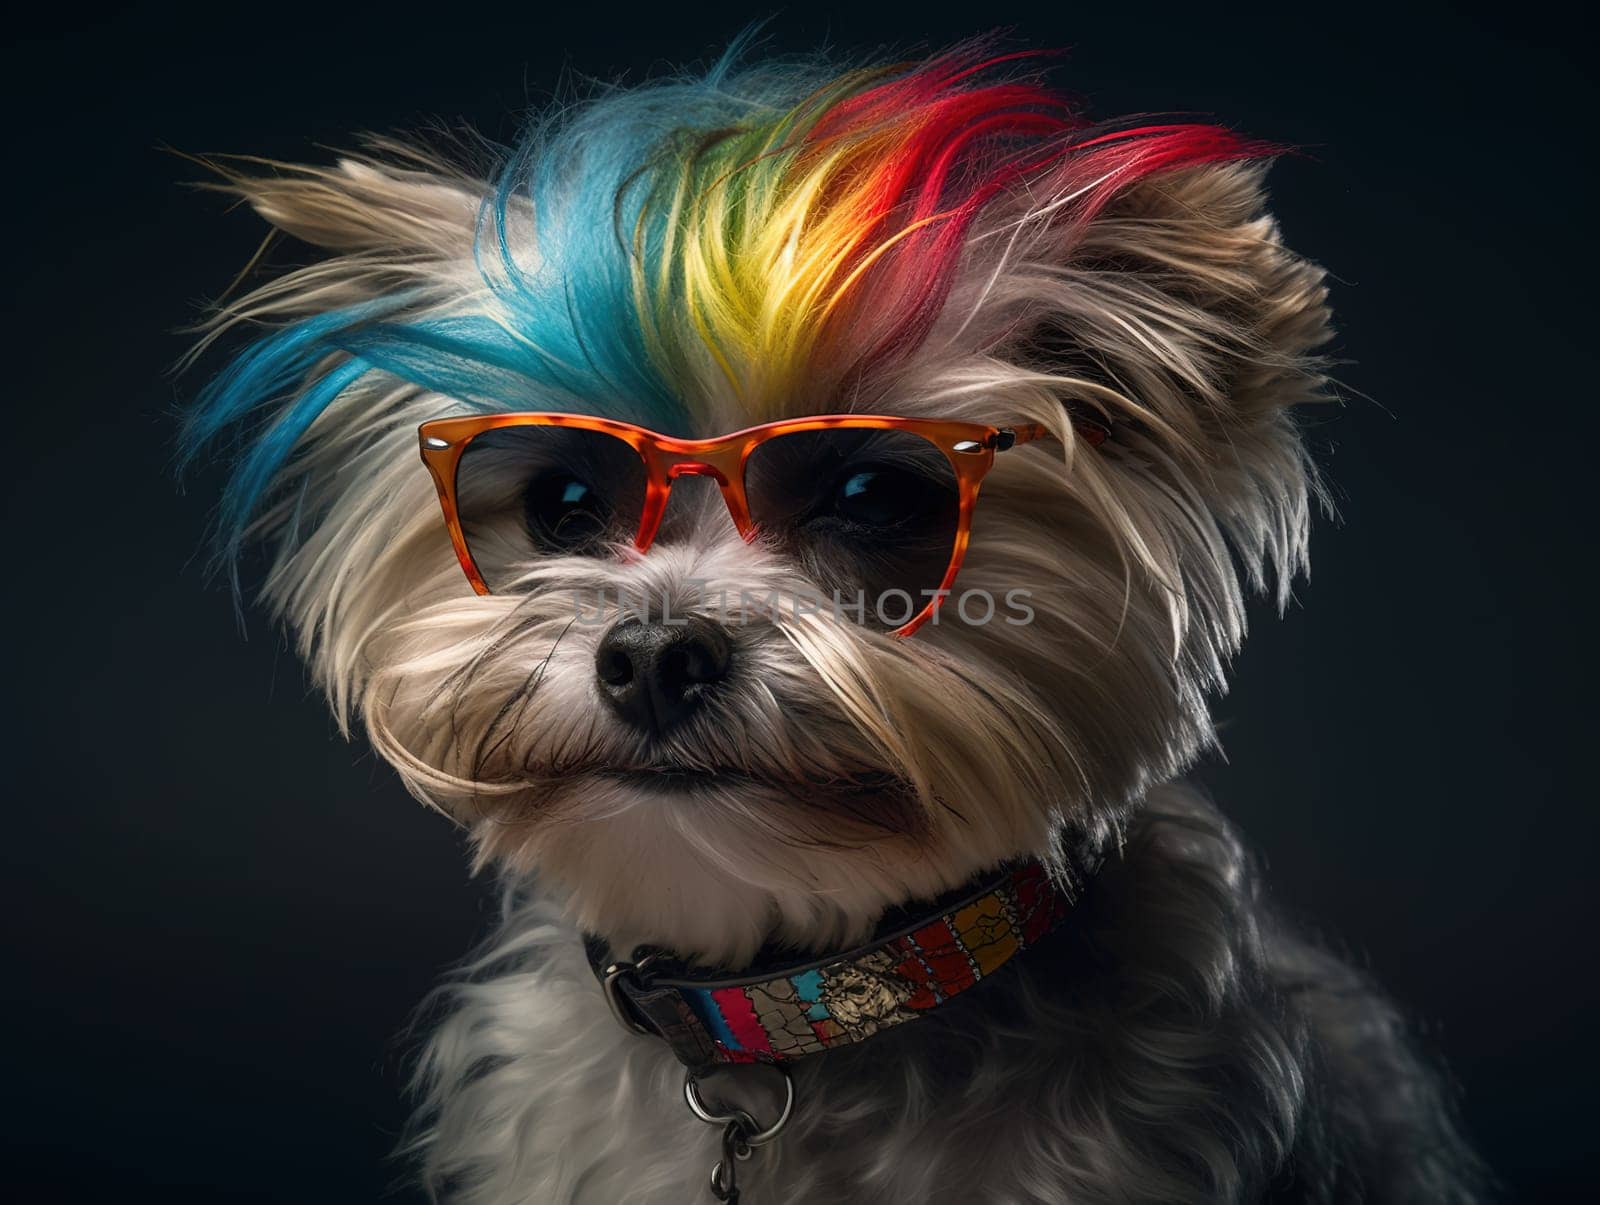 Cute Funny Yorkshire Terrier With Colored Hair In Sunglasses by tan4ikk1